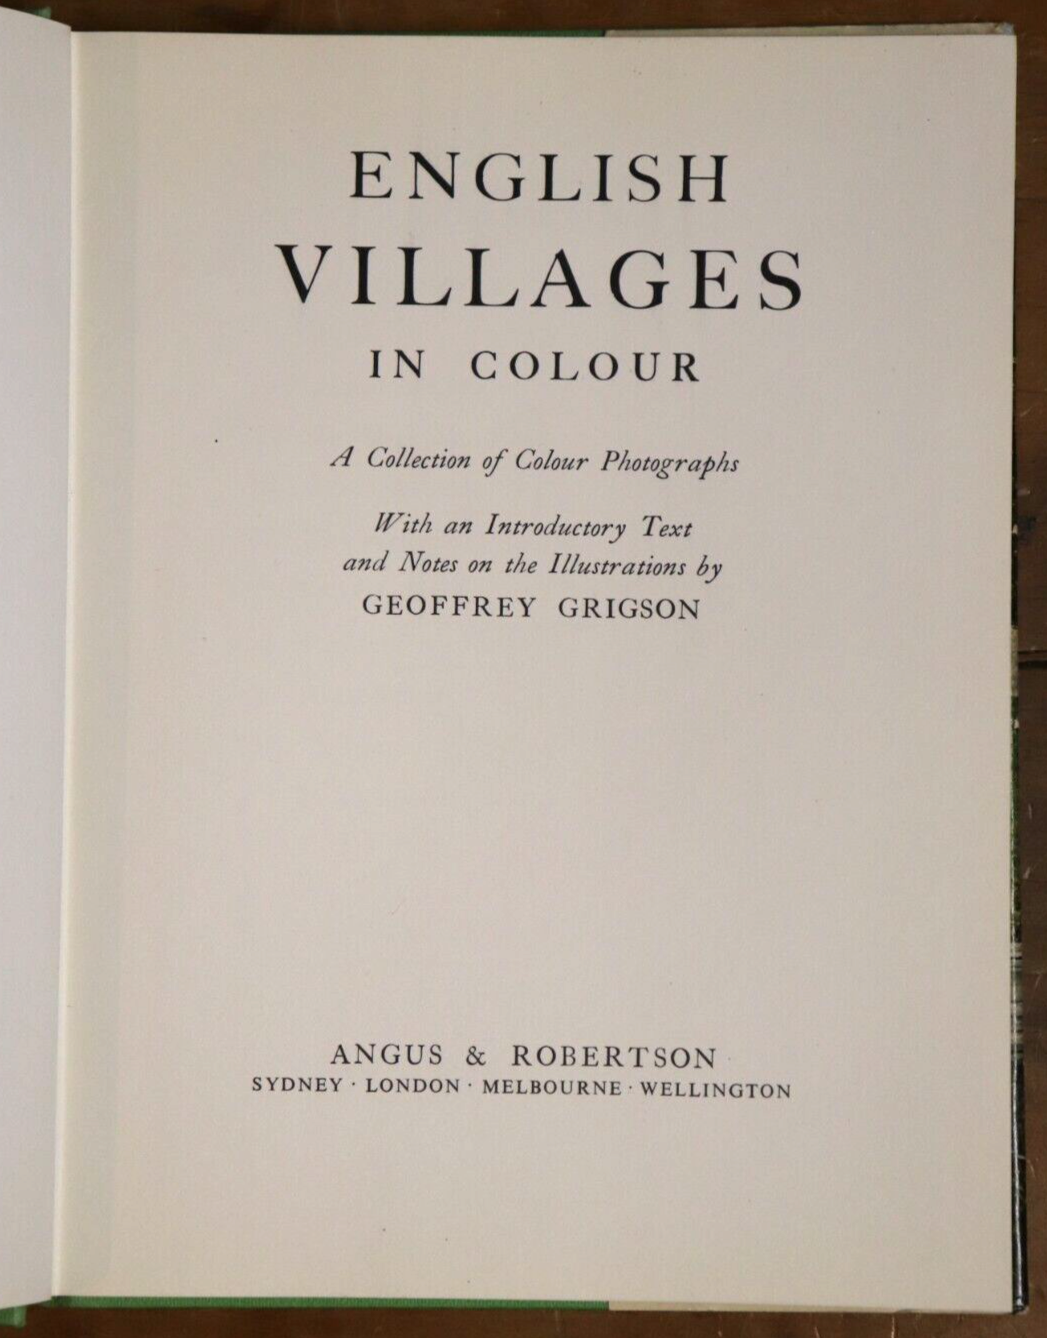 English Villages in Colour - 1958 - 1st Edition - 0